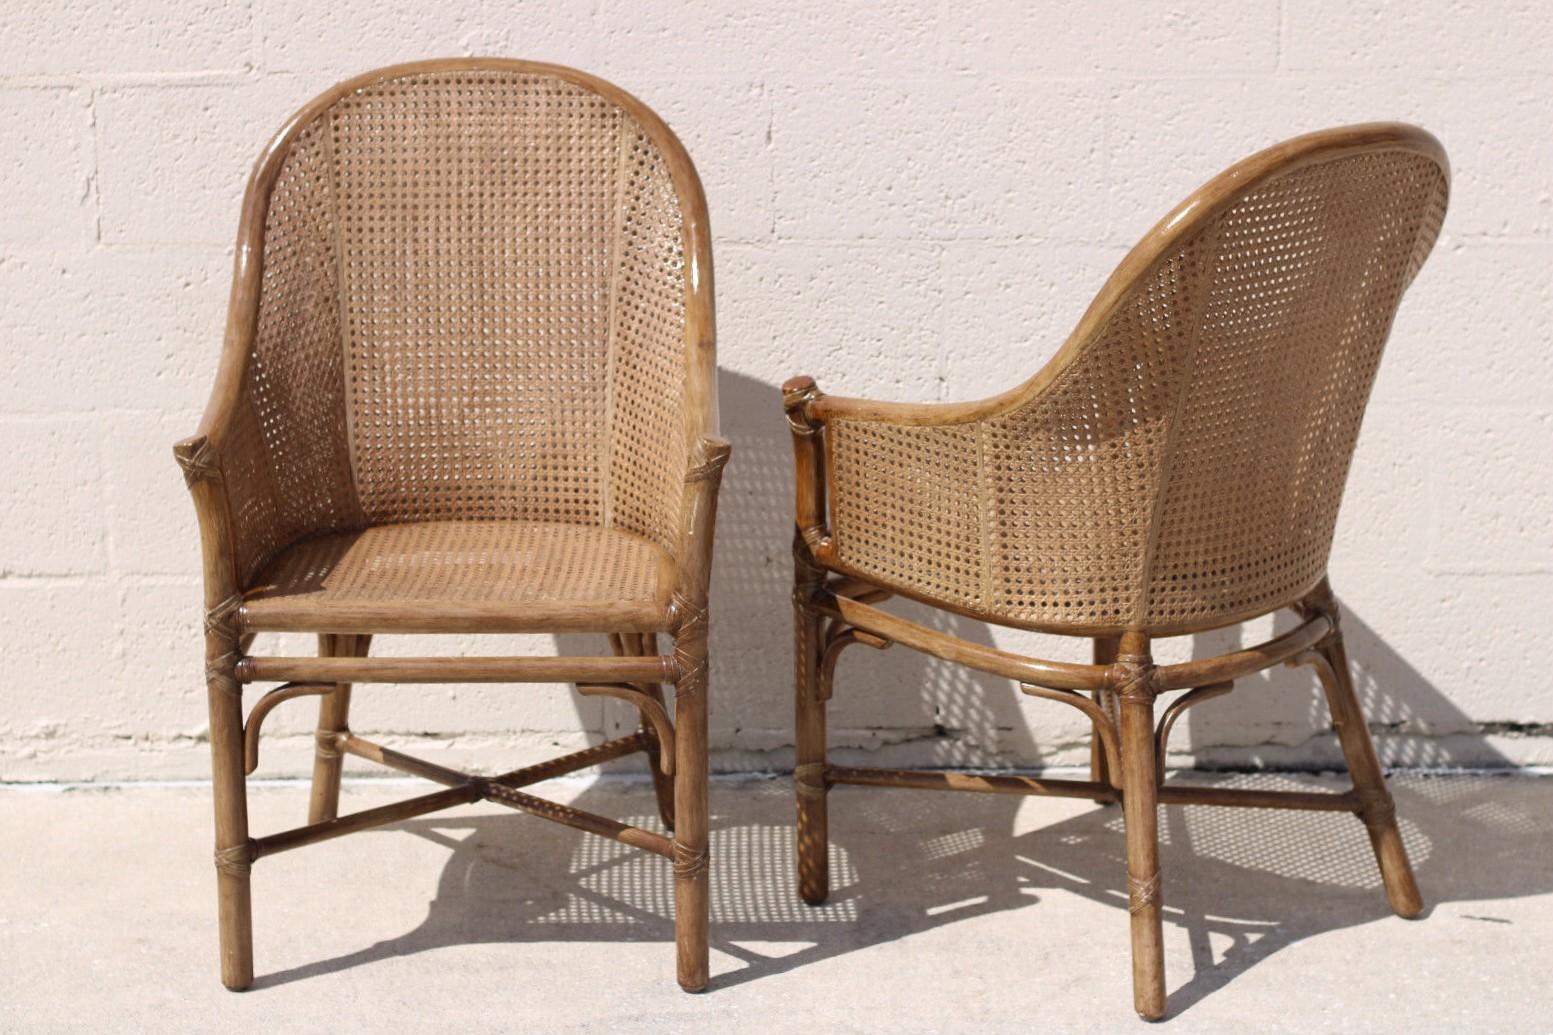 20th Century Elinor McGuire Rattan Caned Barrel Back Arm Chairs, a Pair For Sale